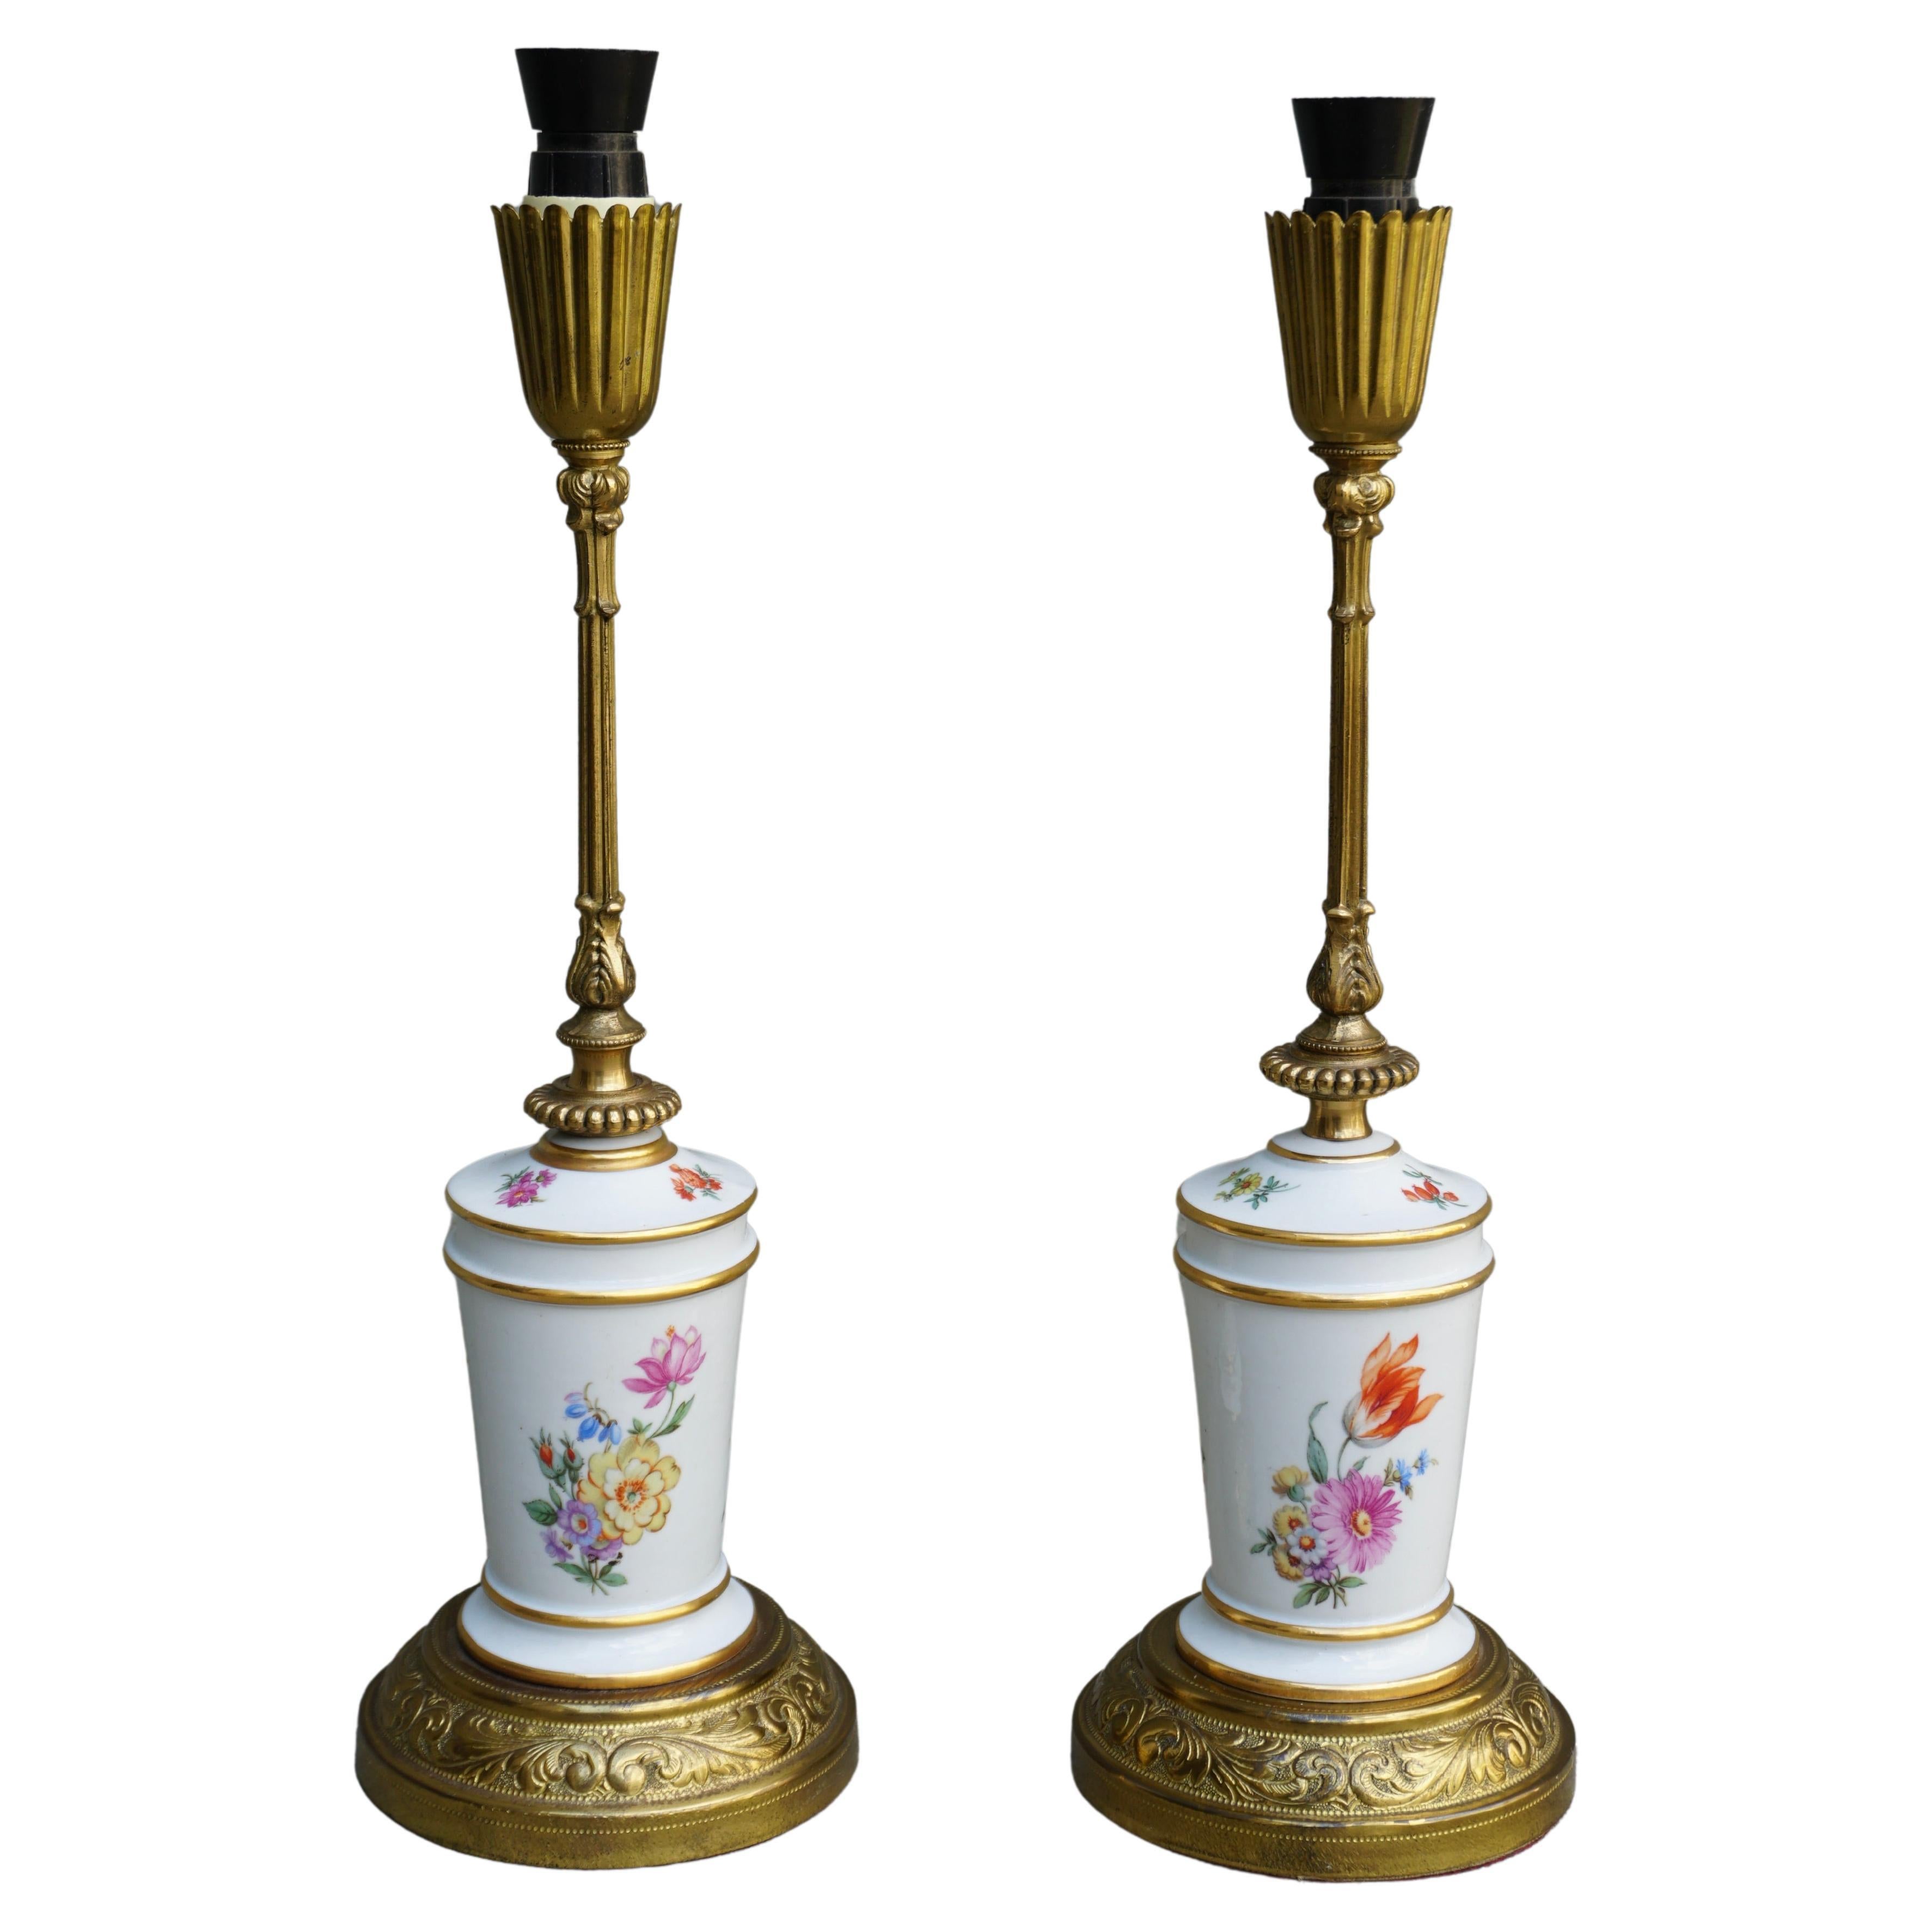 A Pair of French Porcelain and brass Floral Lamps